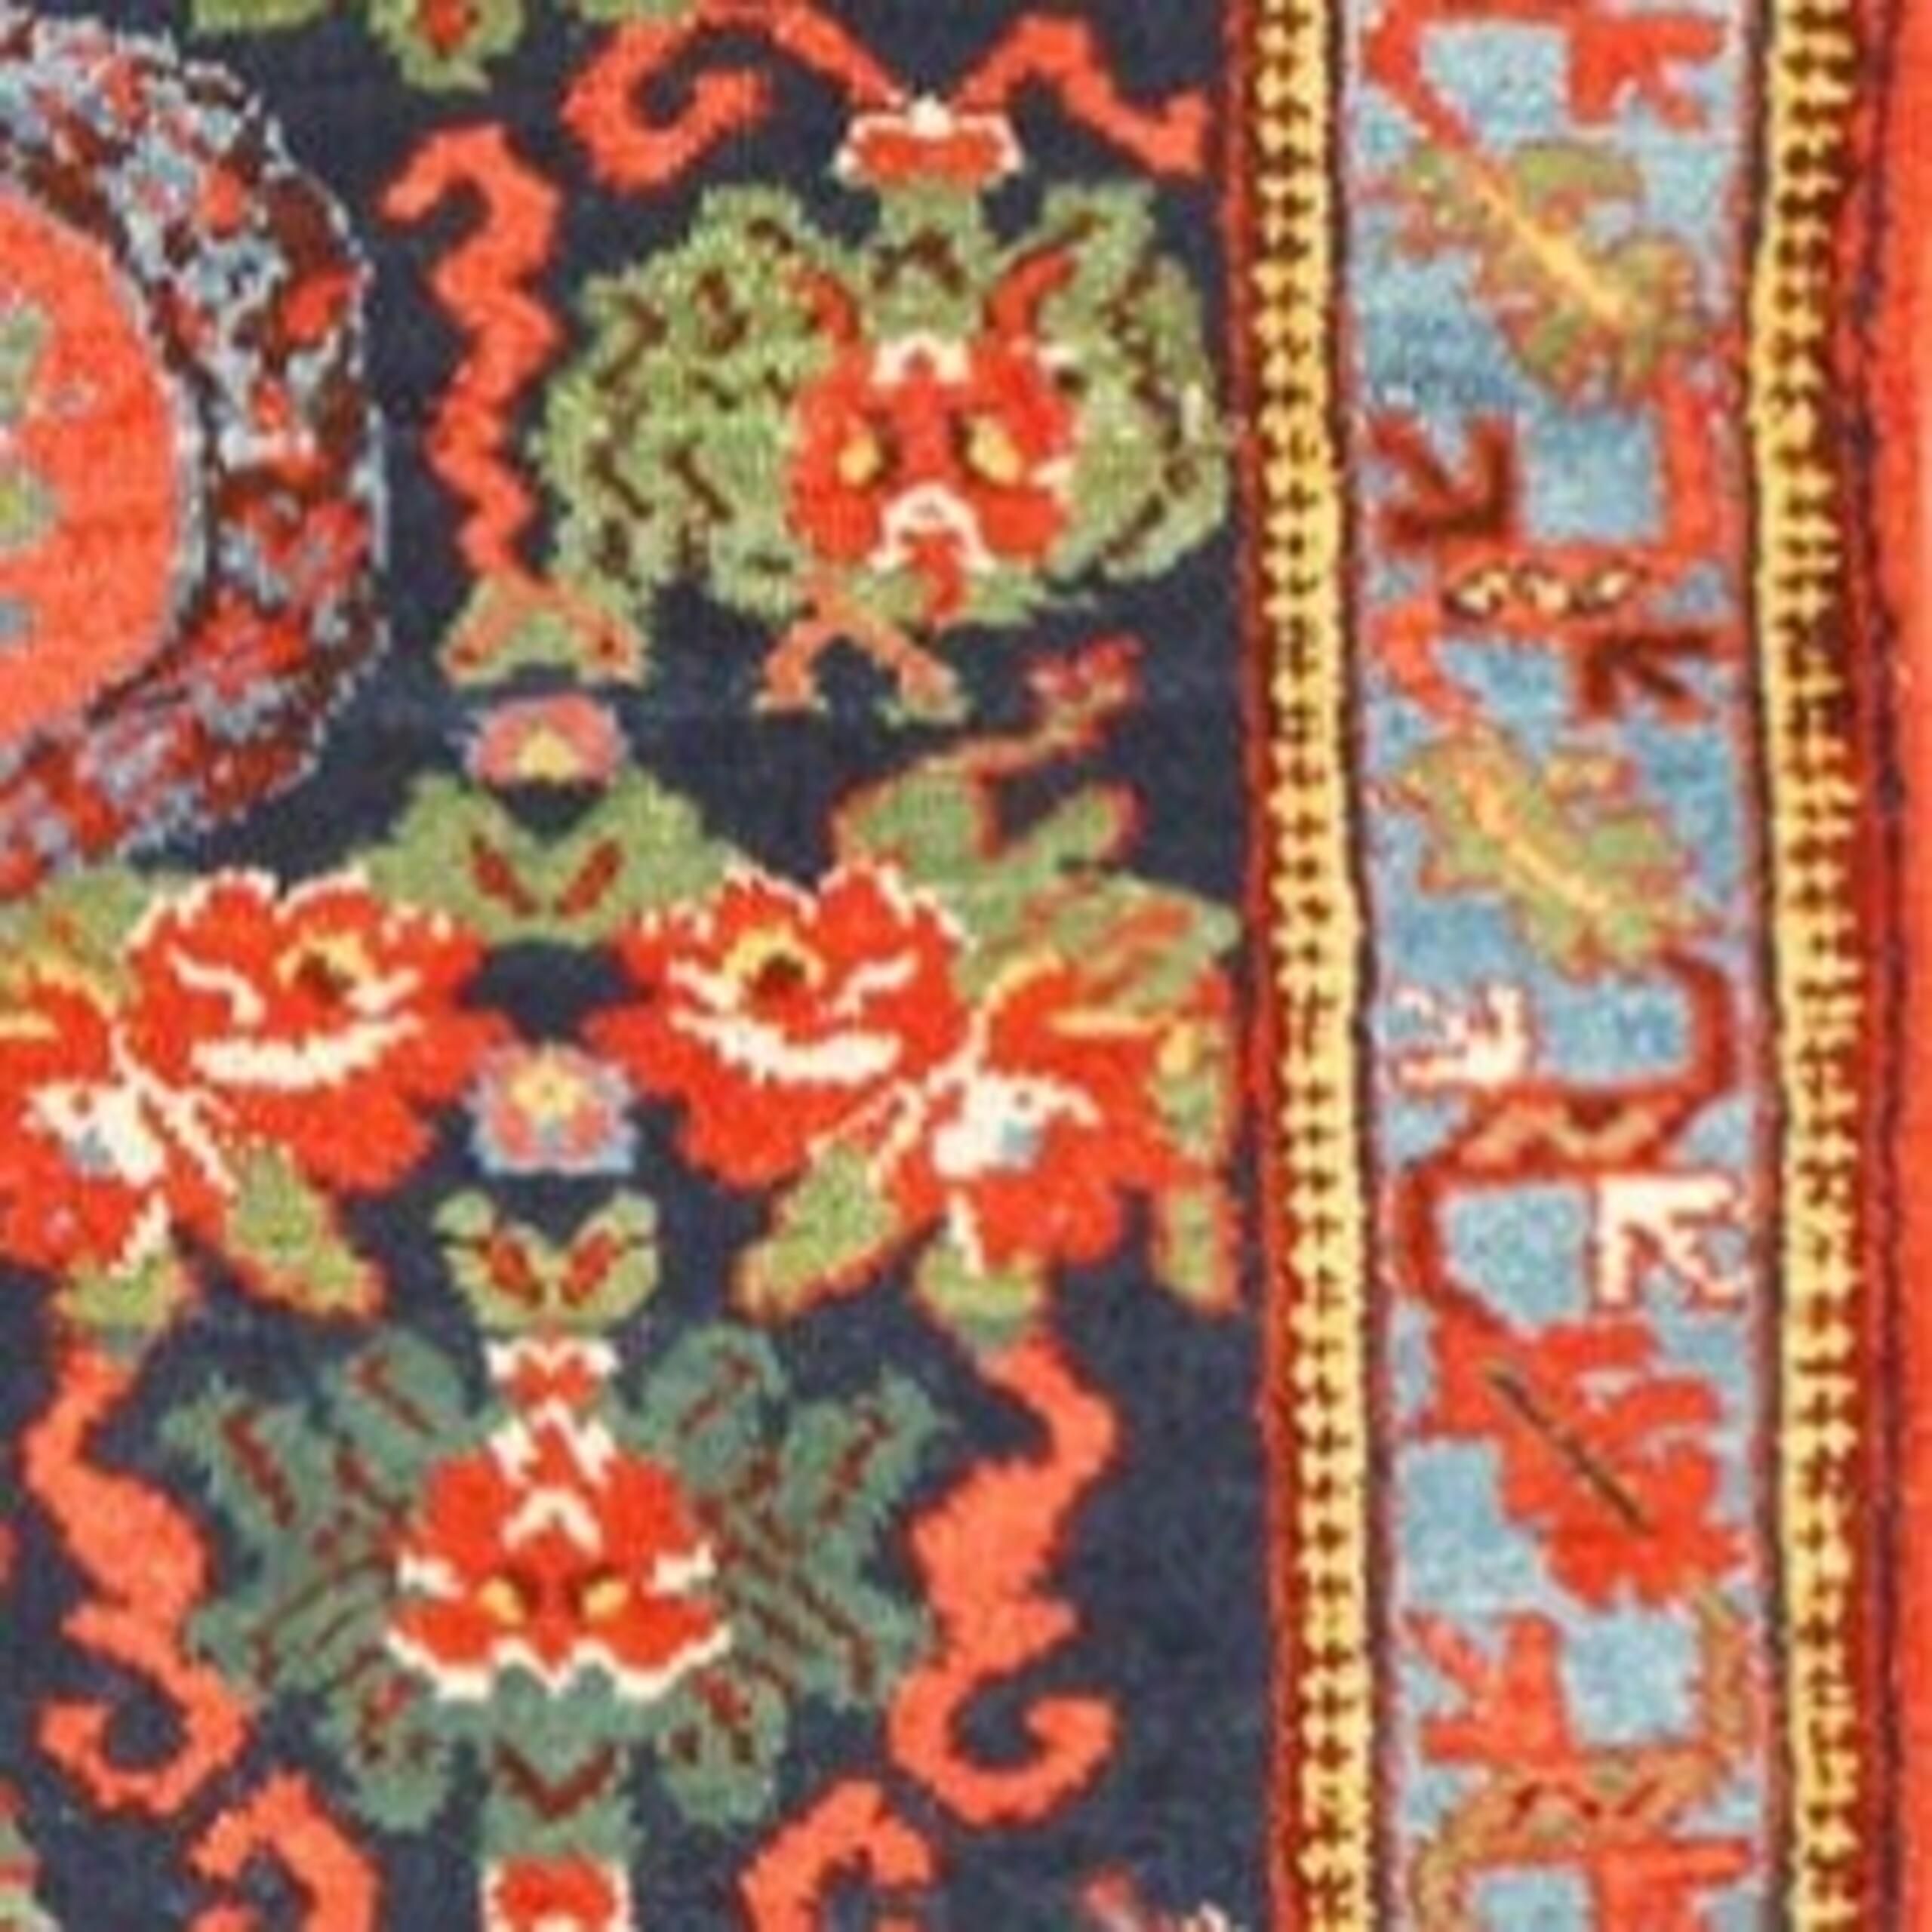 Small Size Beautiful Antique Persian Malayer Rug, Country of Origin / Rug Type: Persian Rug, Circa Date: 1910 – True to the traditional style of many other Persian Malayer rugs, this wonderful Persian carpet uses vibrant colors and contrasting forms